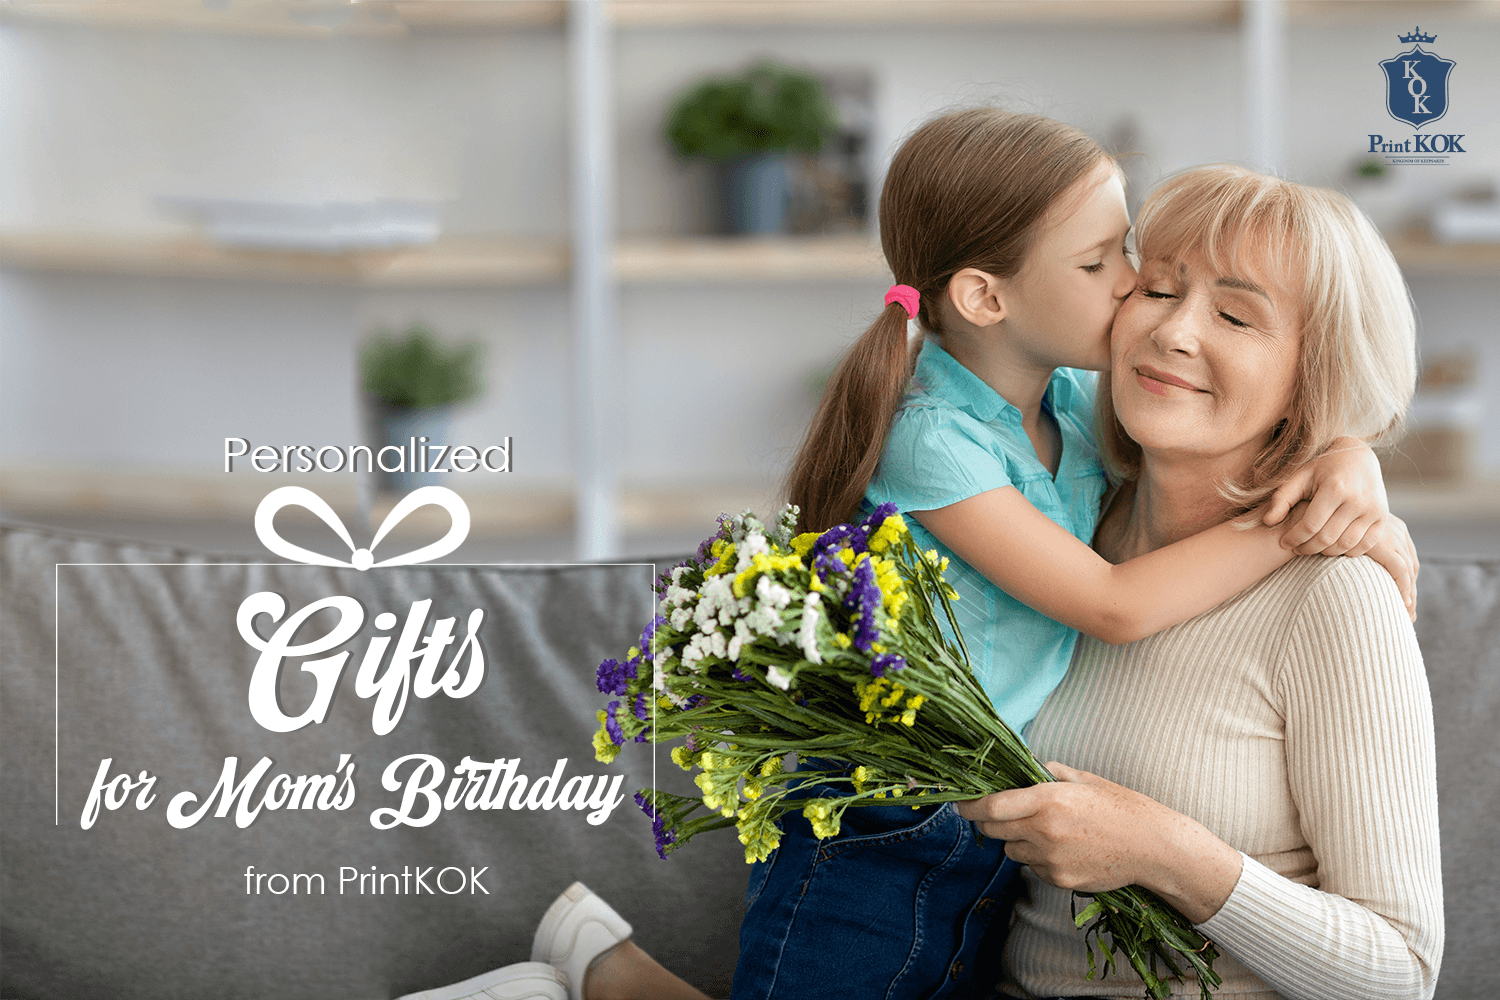 Personalized Gifts for Mom's Birthday from PrintKOK 